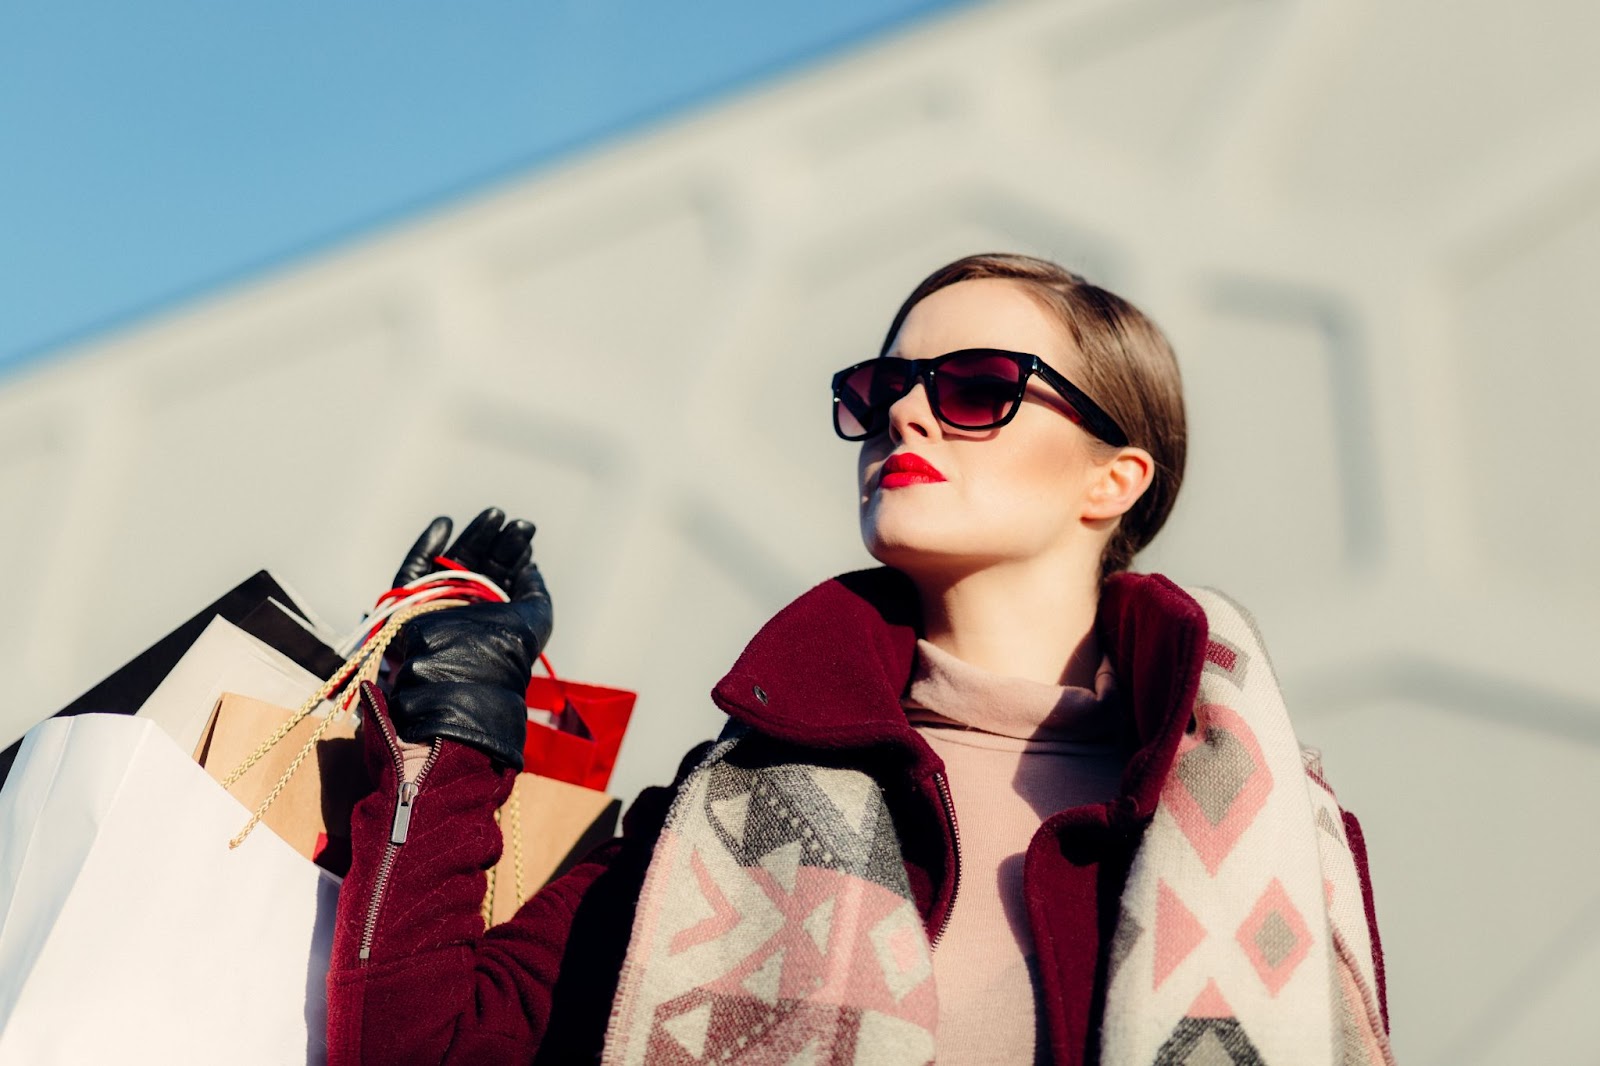 a girl with sunglasses holding shopping bags